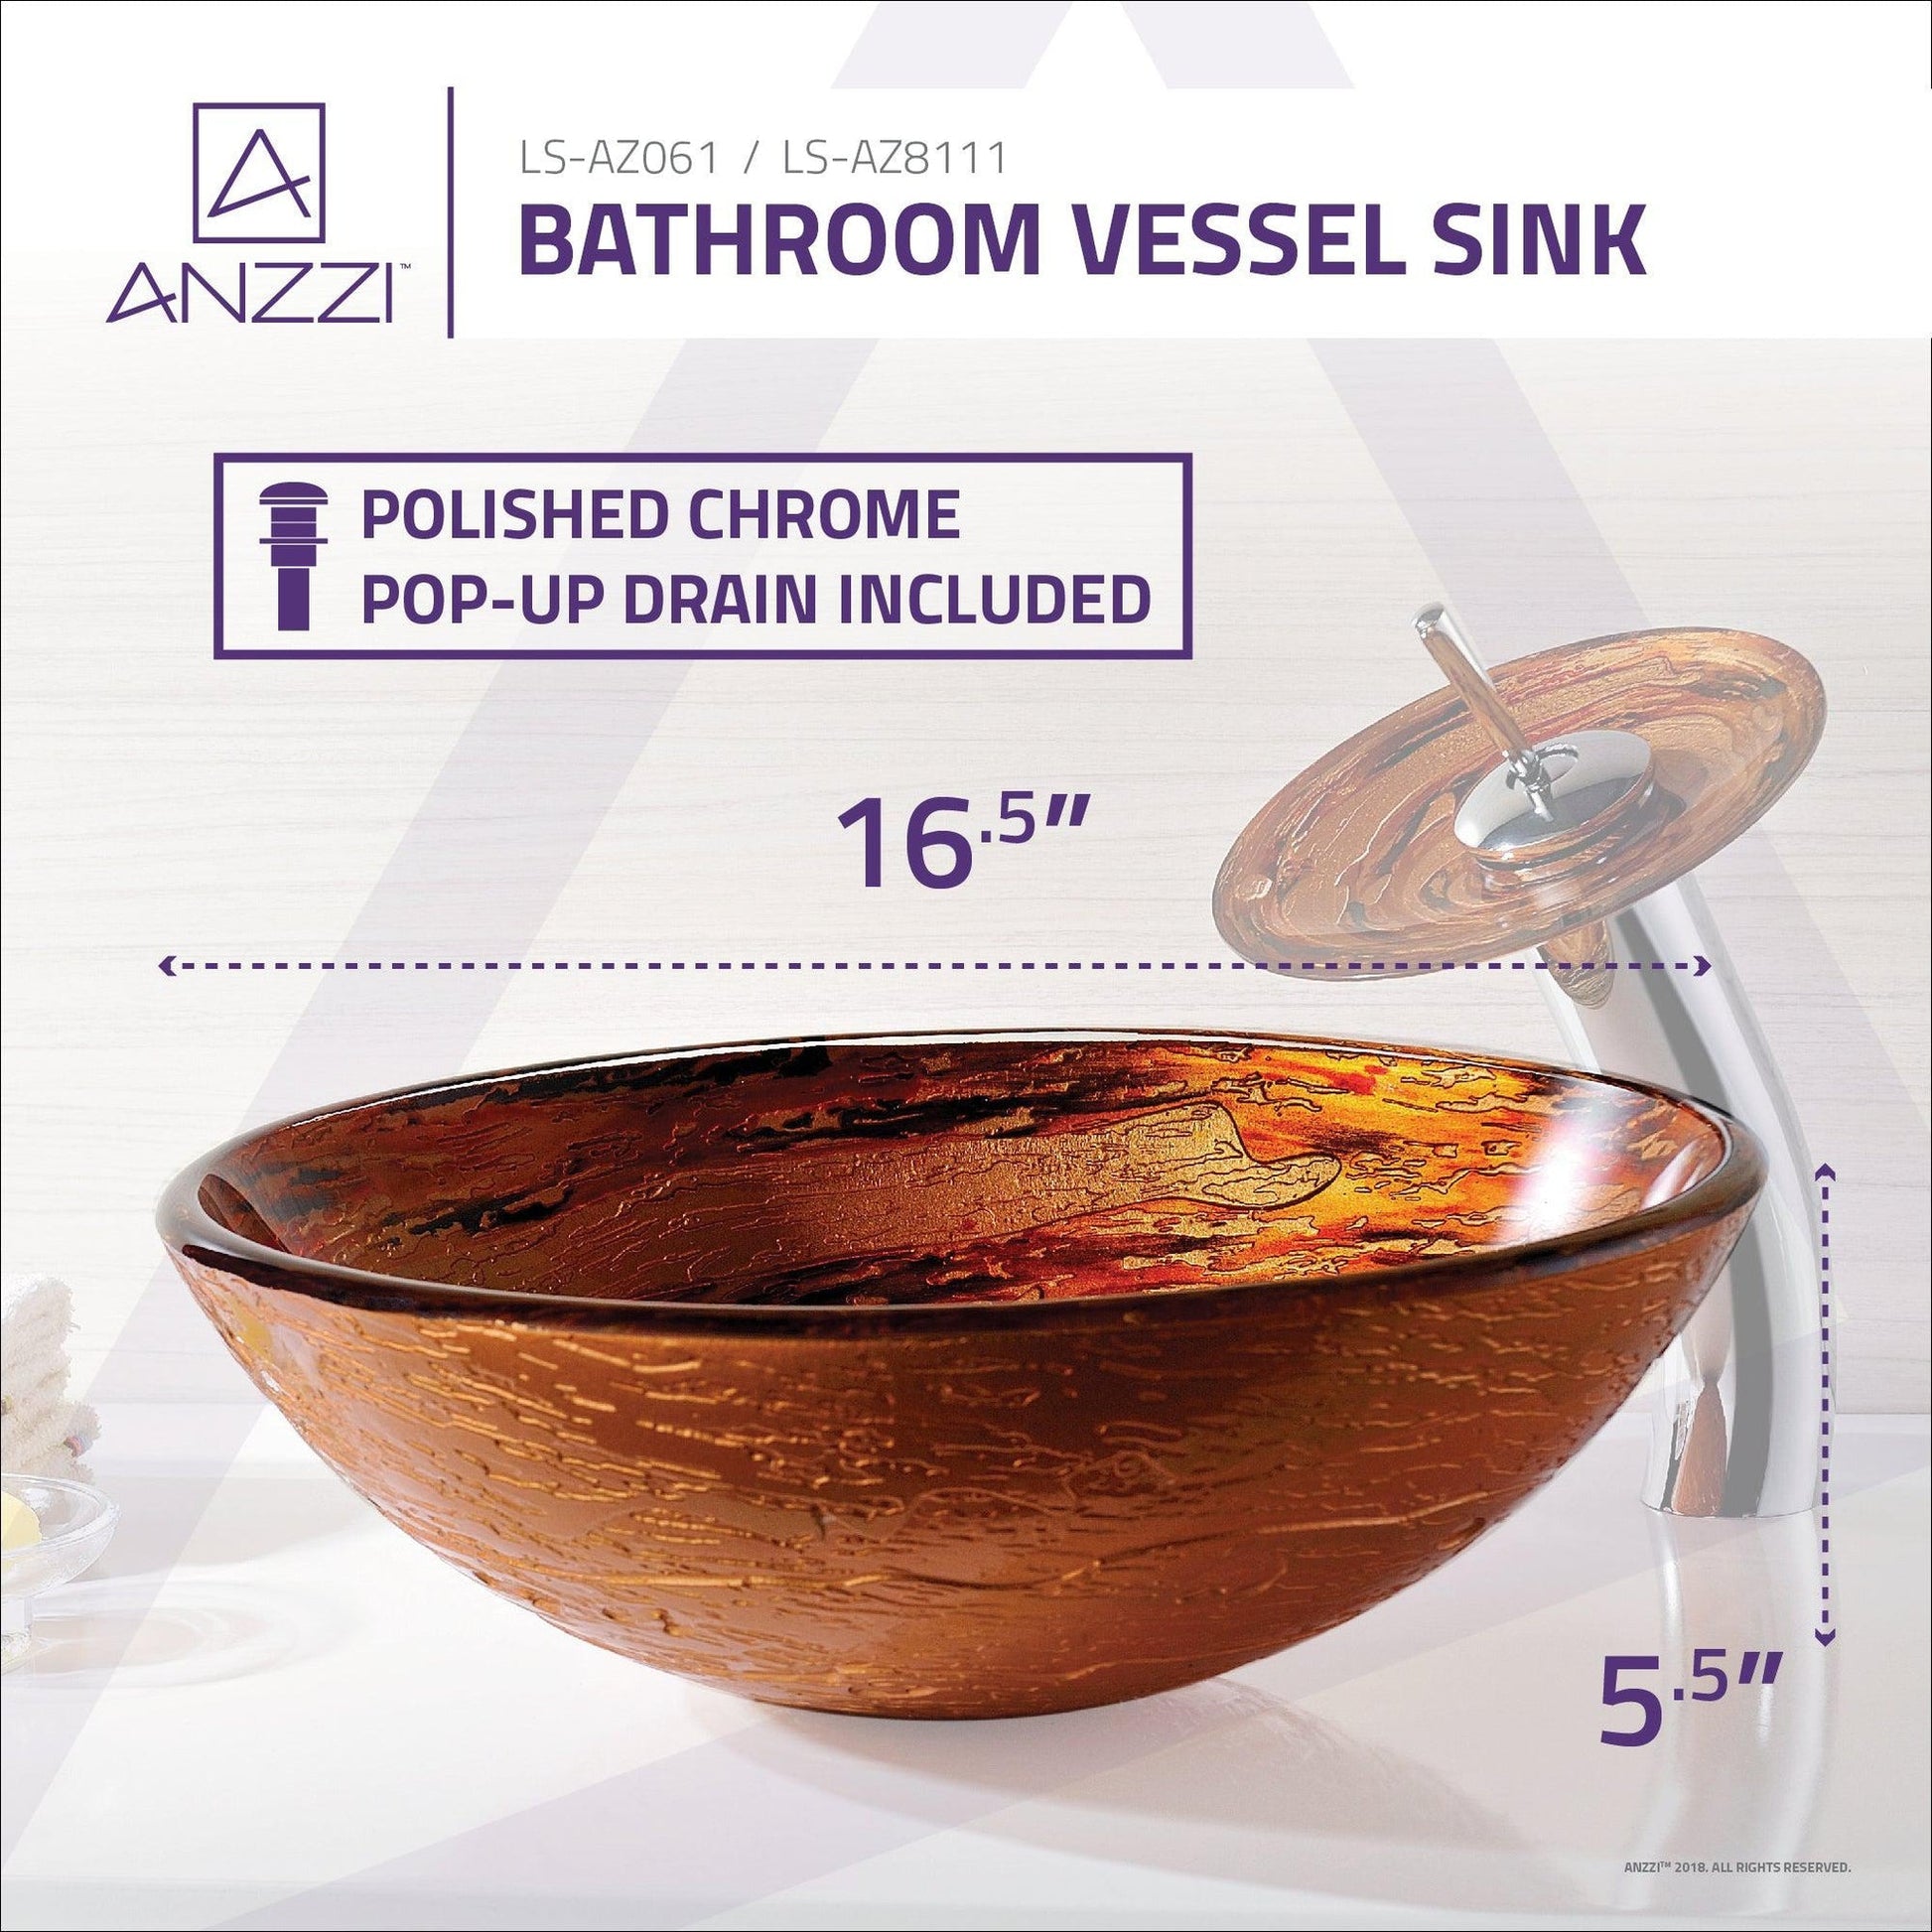 ANZZI Komaru Series 17" x 17" Round Lustrous Brown Deco-Glass Vessel Sink With Polished Chrome Pop-Up Drain and Waterfall Faucet